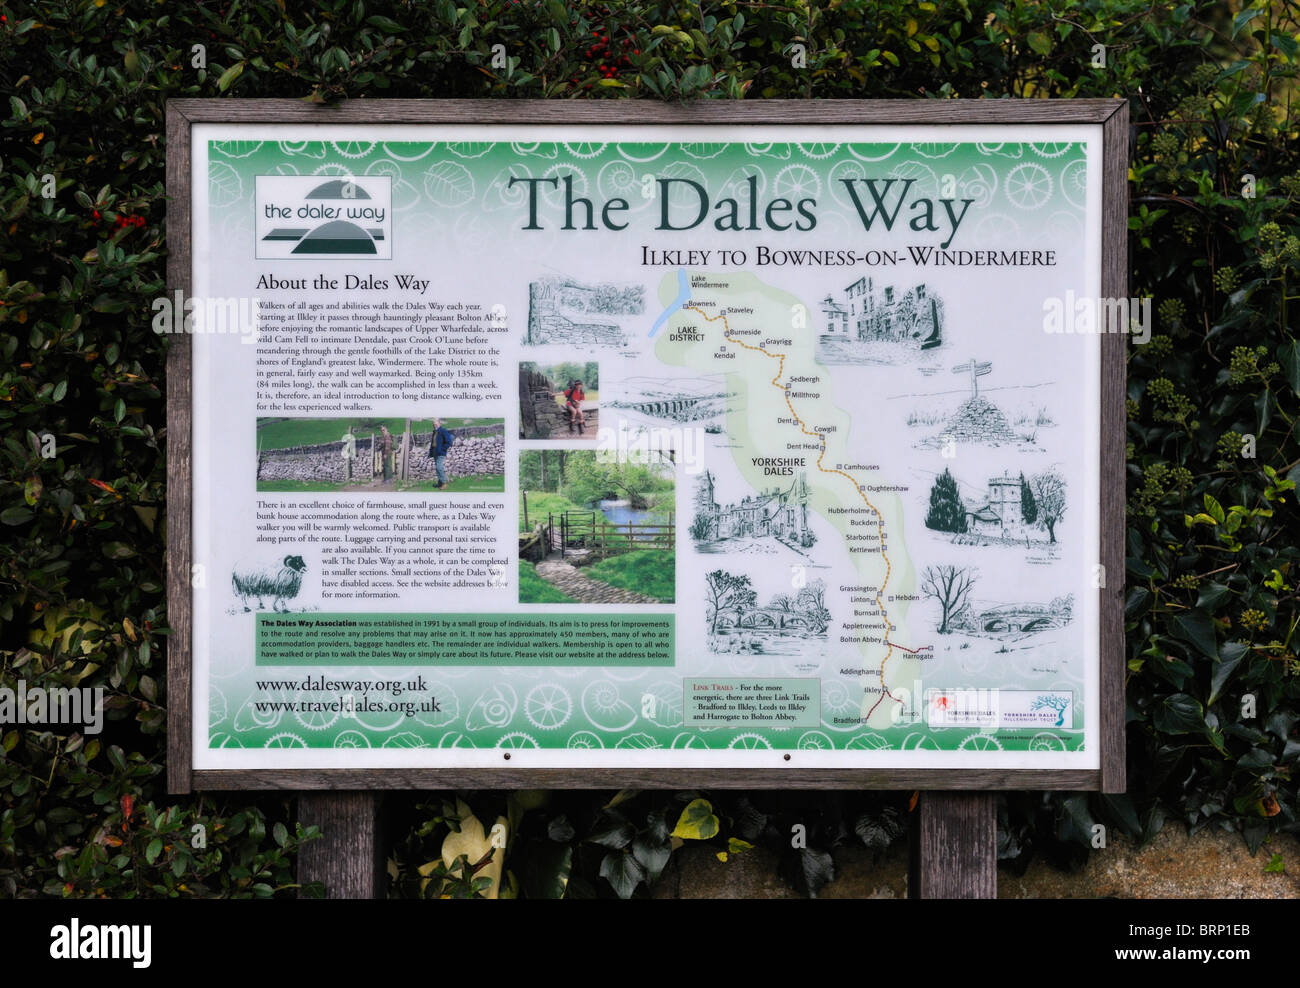 The Dales Way information board at the 16th.Century Old Bridge. Ilkley, West Yorkshire, England, United Kingdom, Europe. Stock Photo